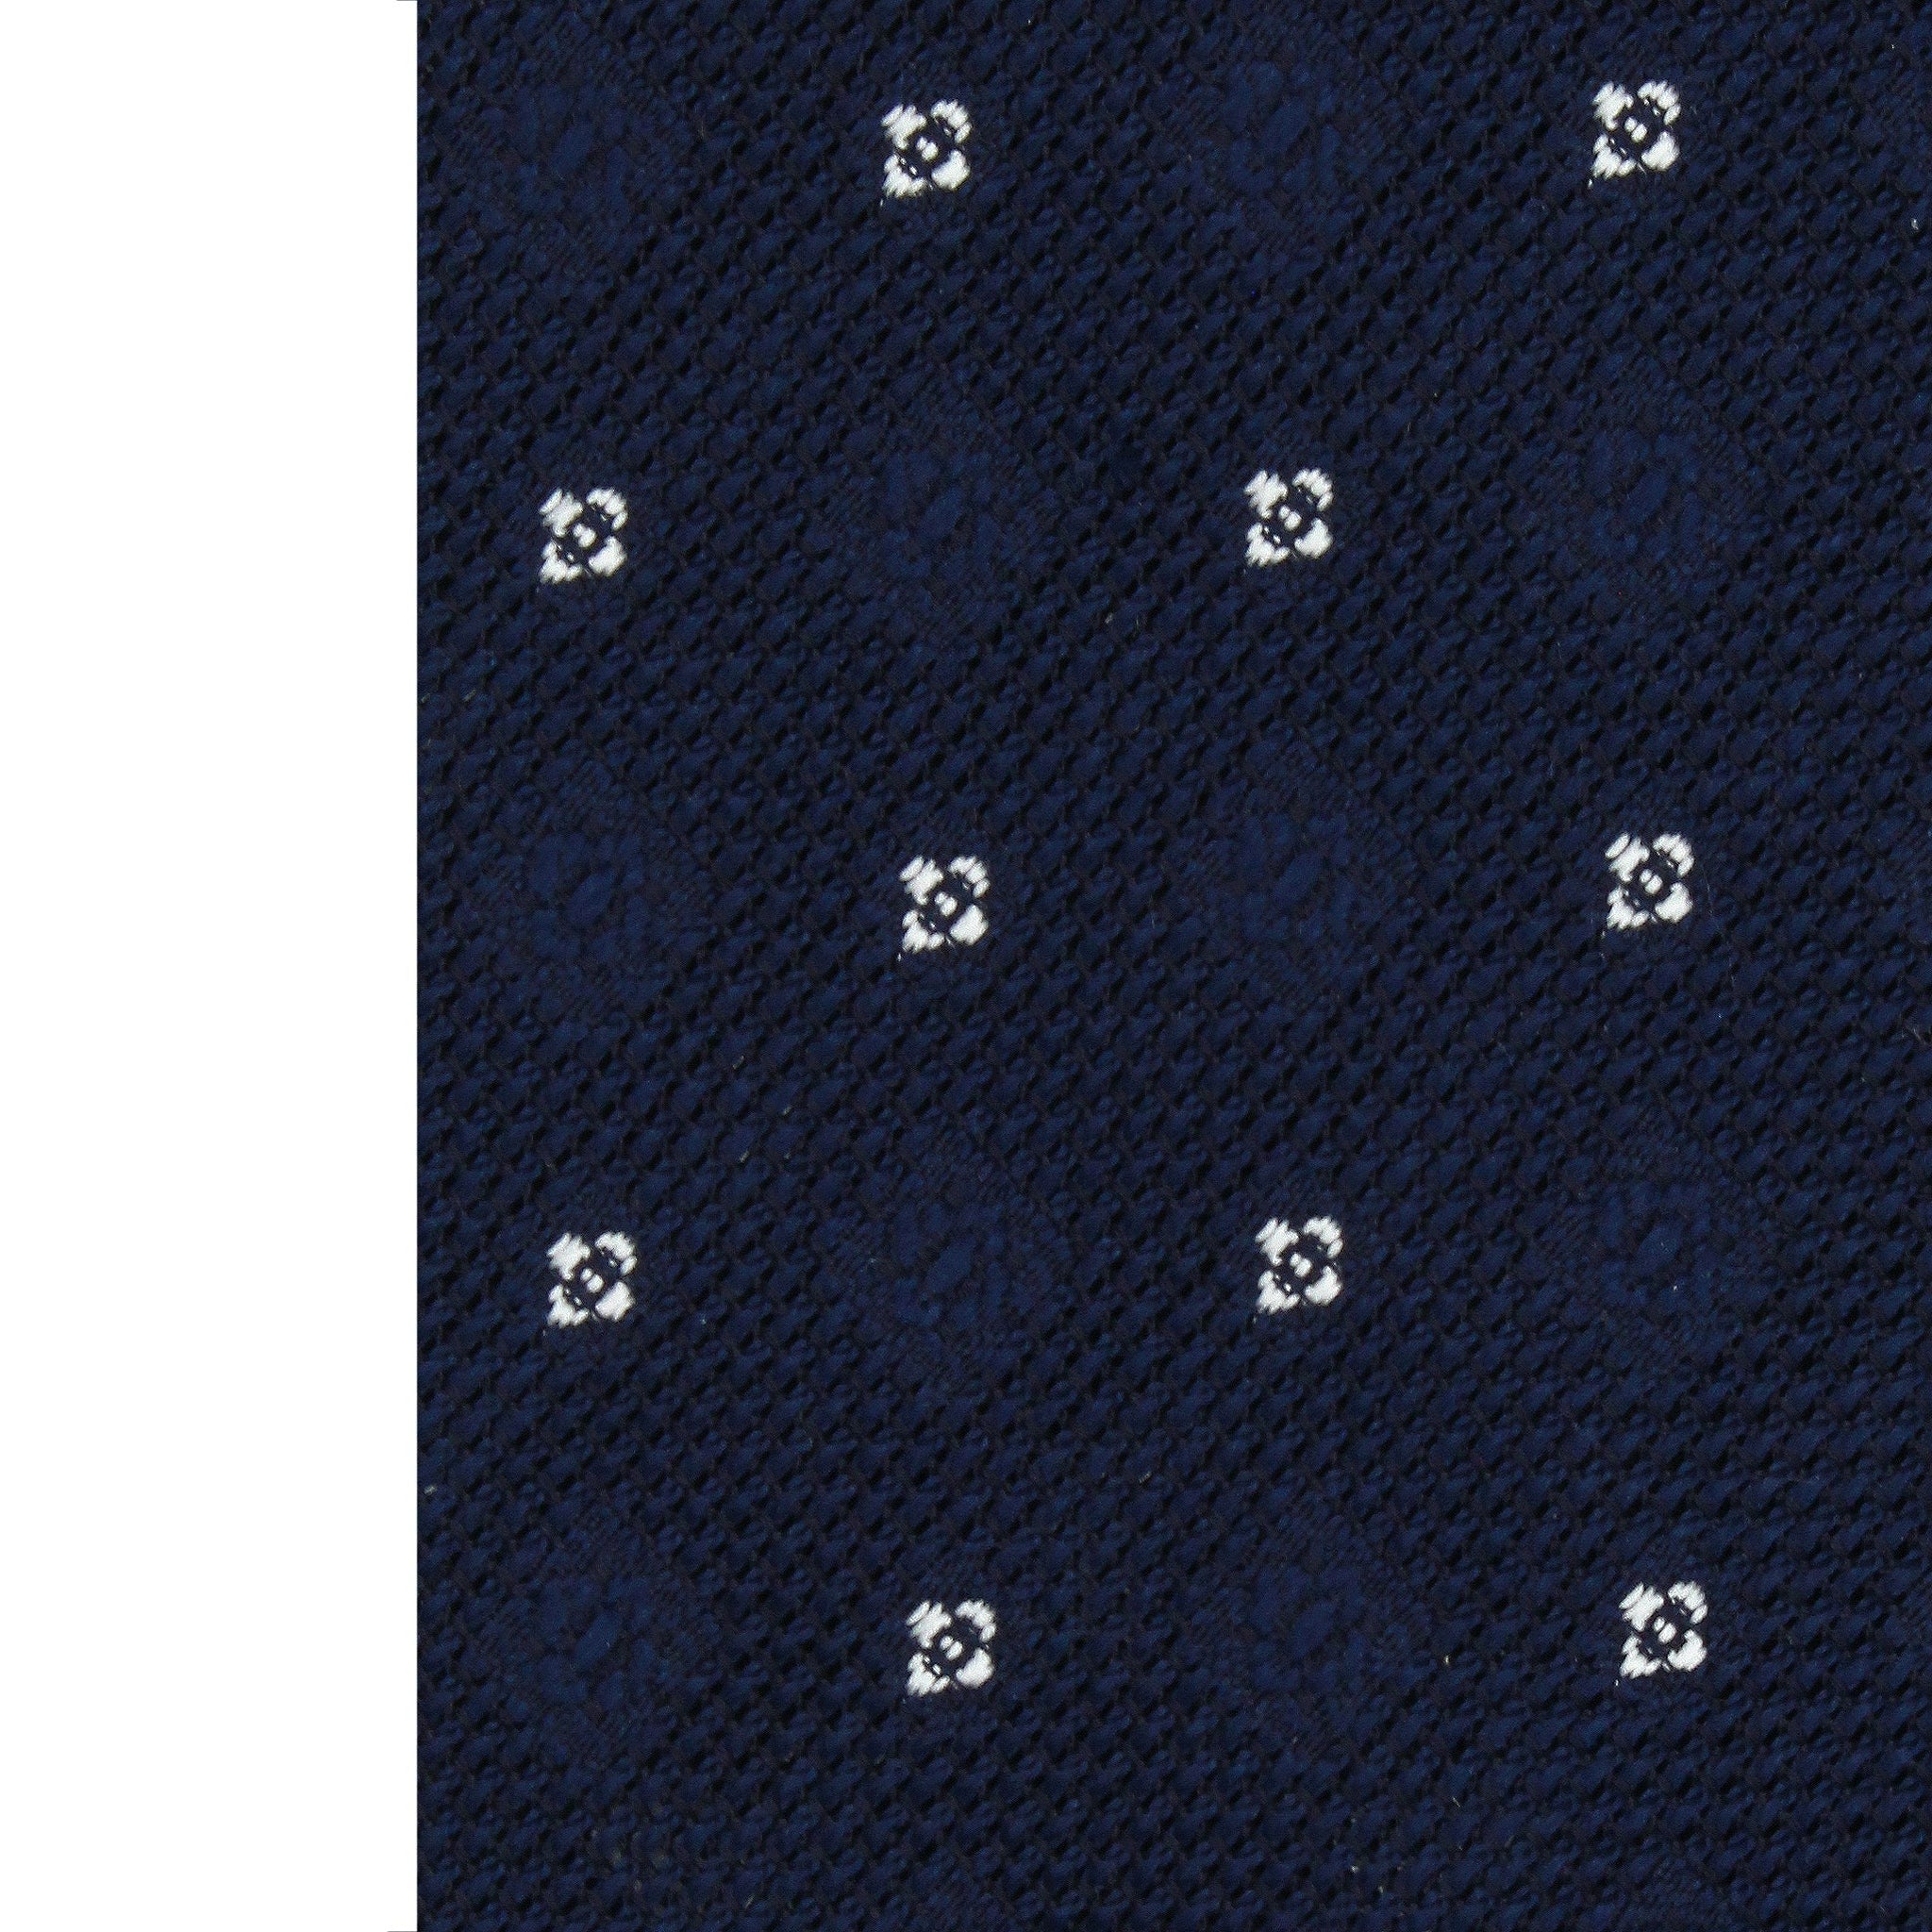 Anversa single-color blue silk tie with white patterns